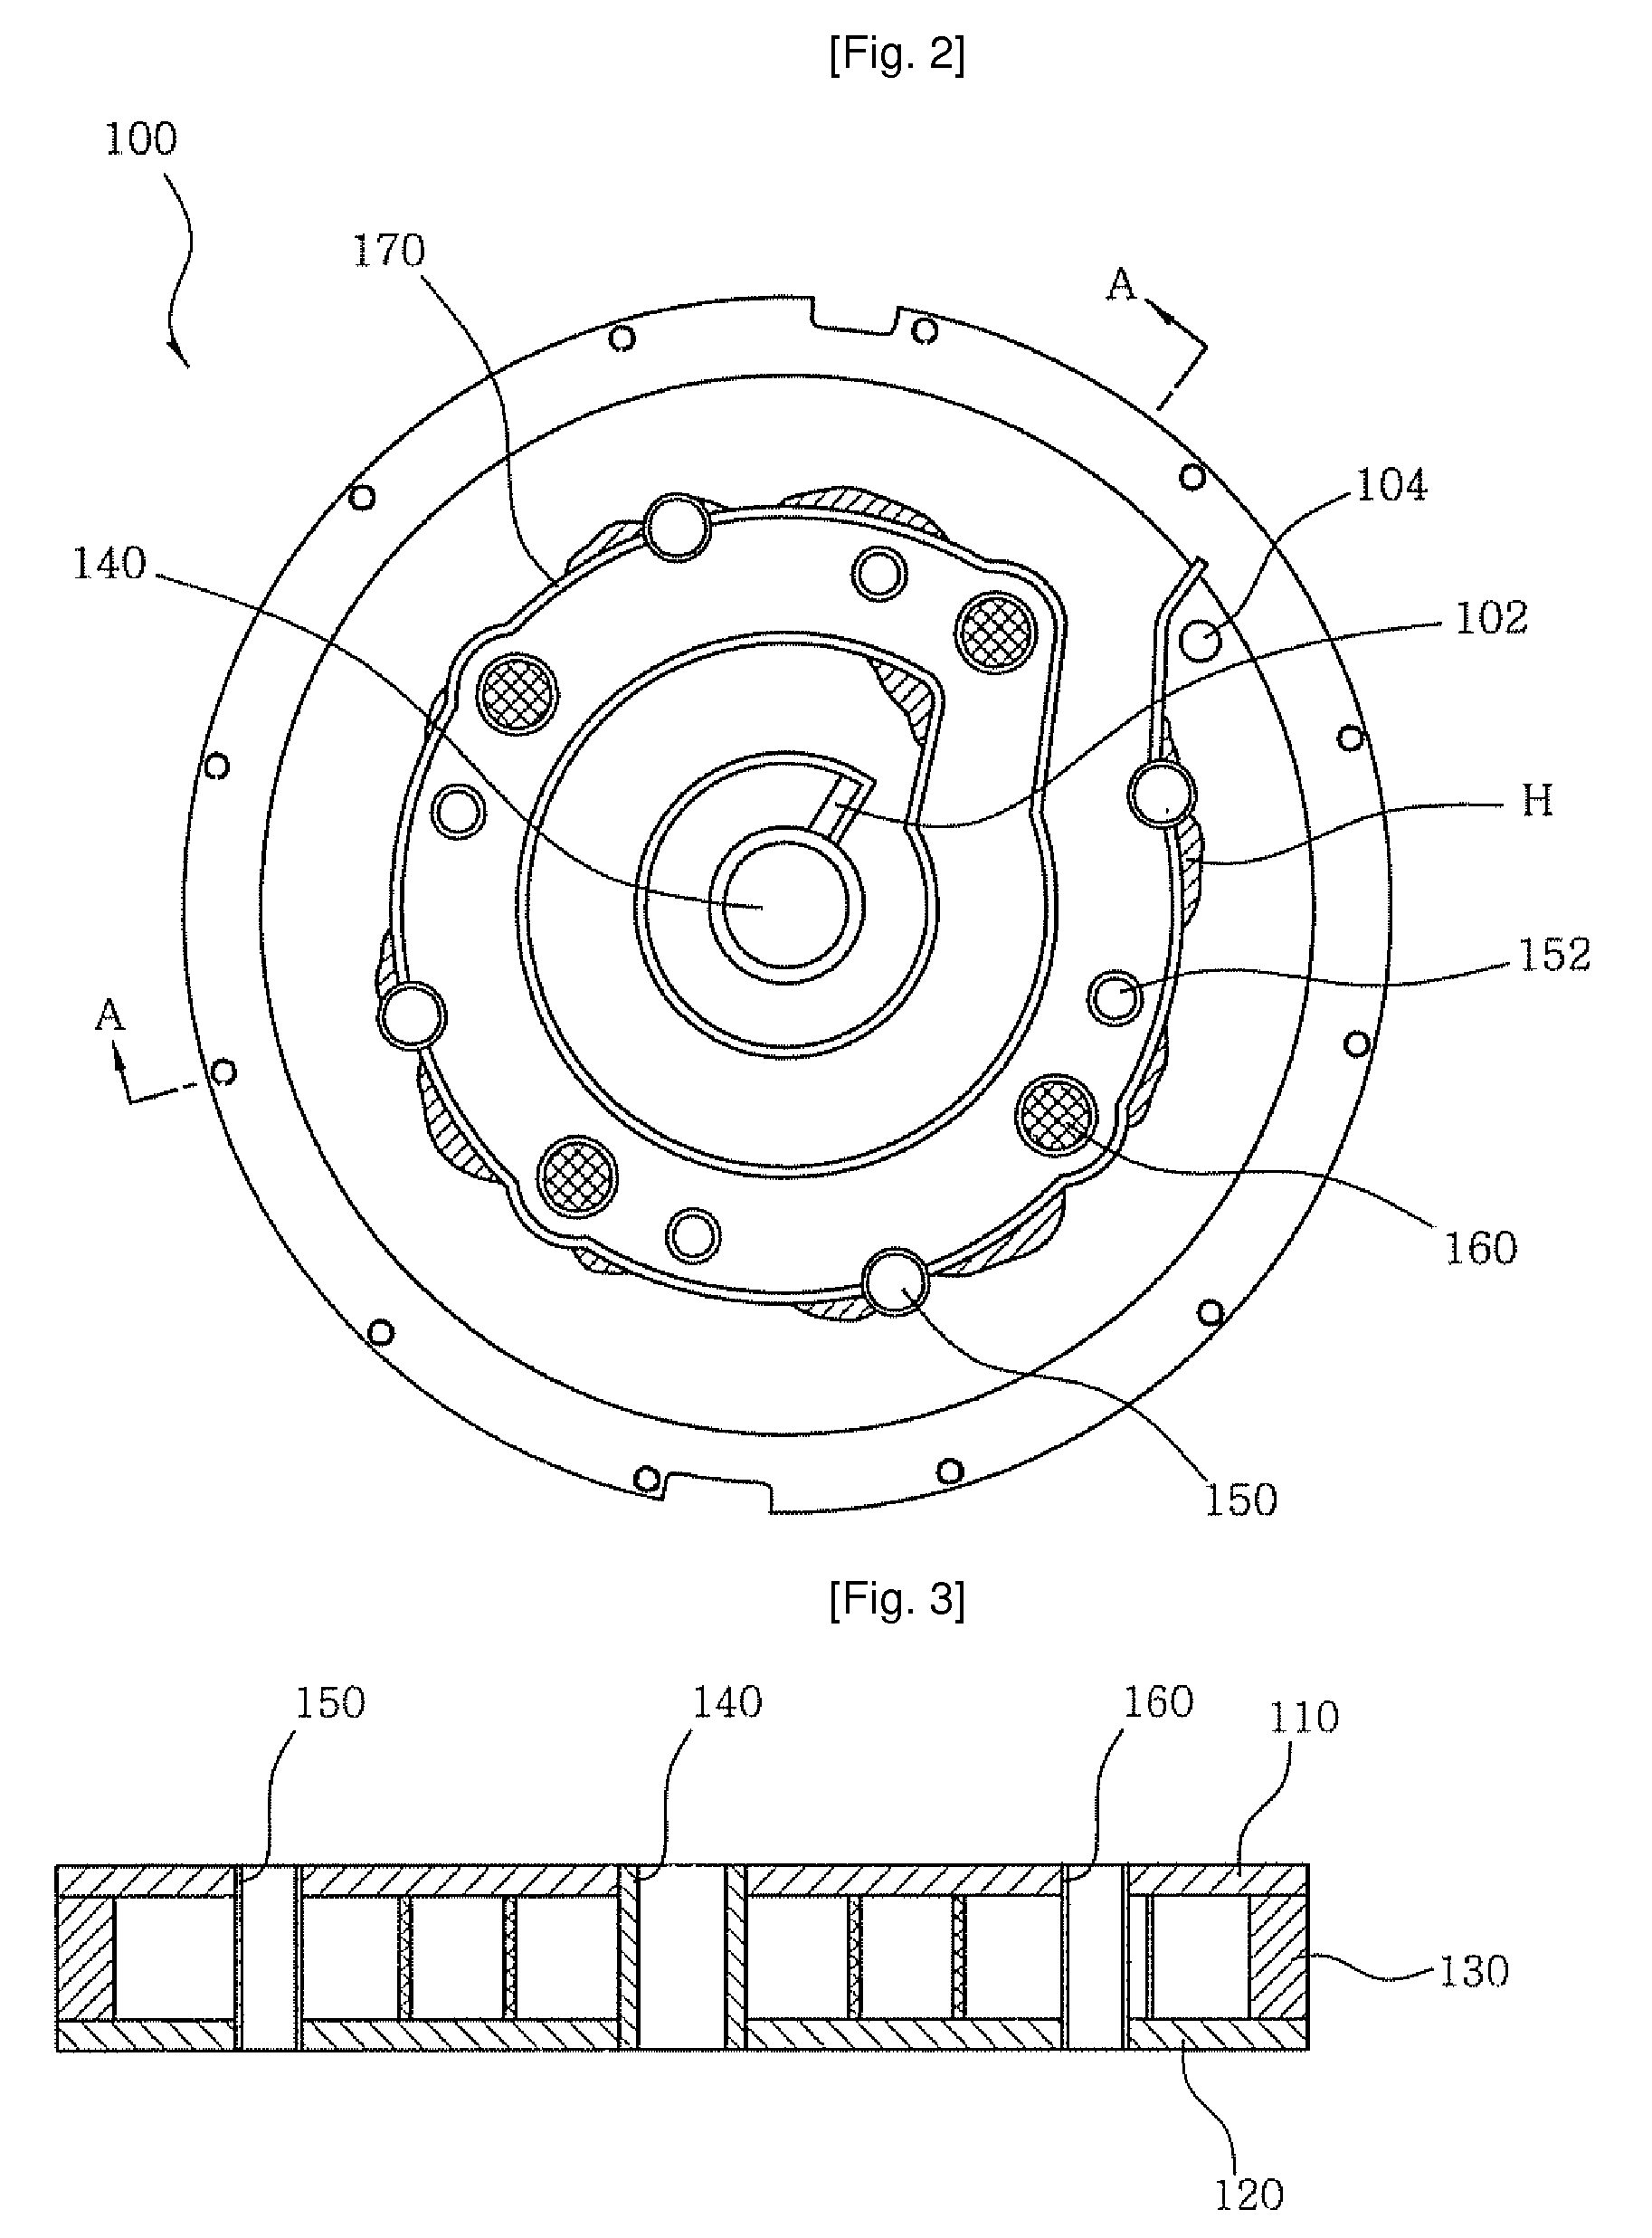 Cooling System for Chamber of Ingot Growth Arrangement